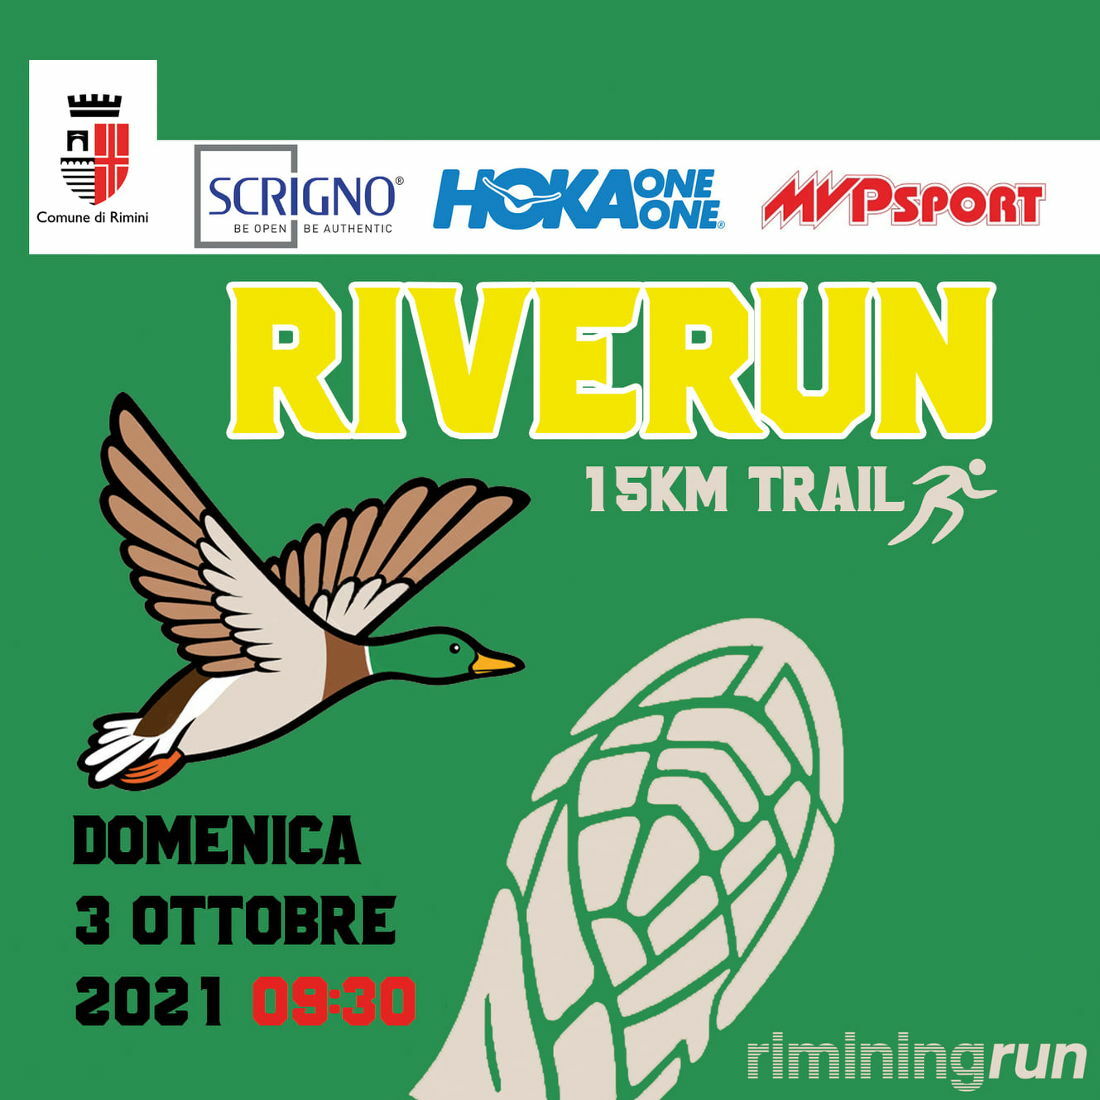 BE OPEN BE ACTIVE with Scrigno and RIVERUN!